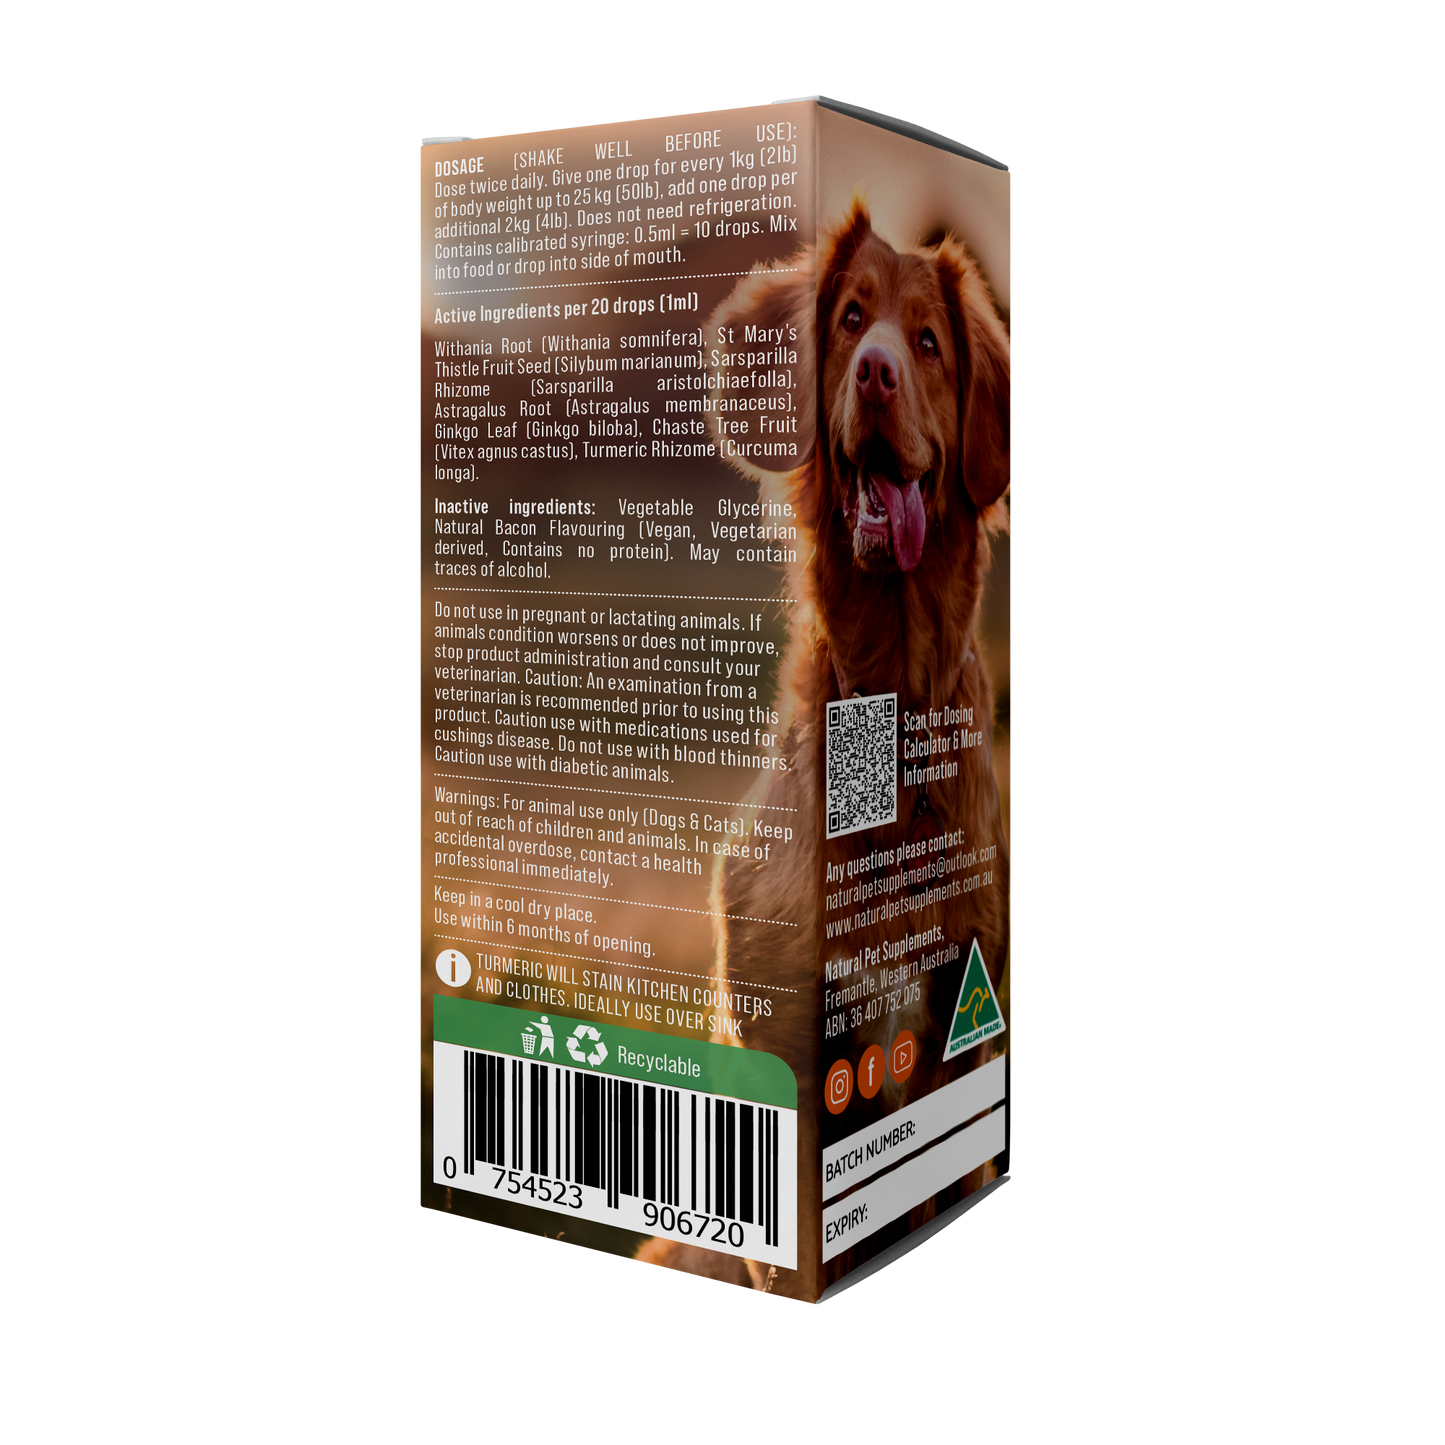 Adrenal Support Herbal Tincture For Dogs and Cats